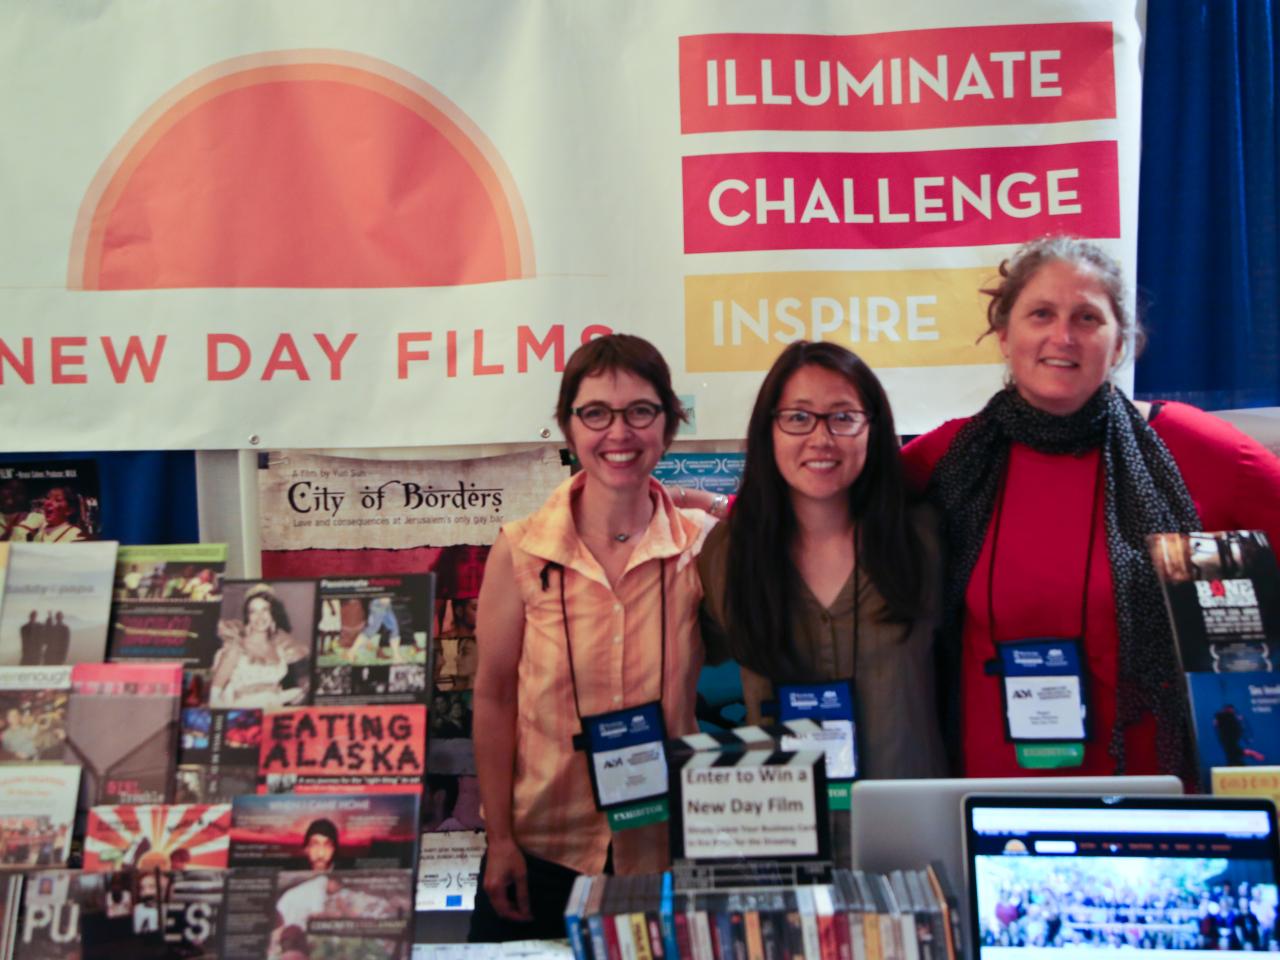 Three New Day filmmakers smile and stand together with conference badges around their necks for the American Sociological Association conference. They’re surrounded by New Day Films including posters, DVDs, a large New Day Films banner, and a laptop with the New Day Films website on it.